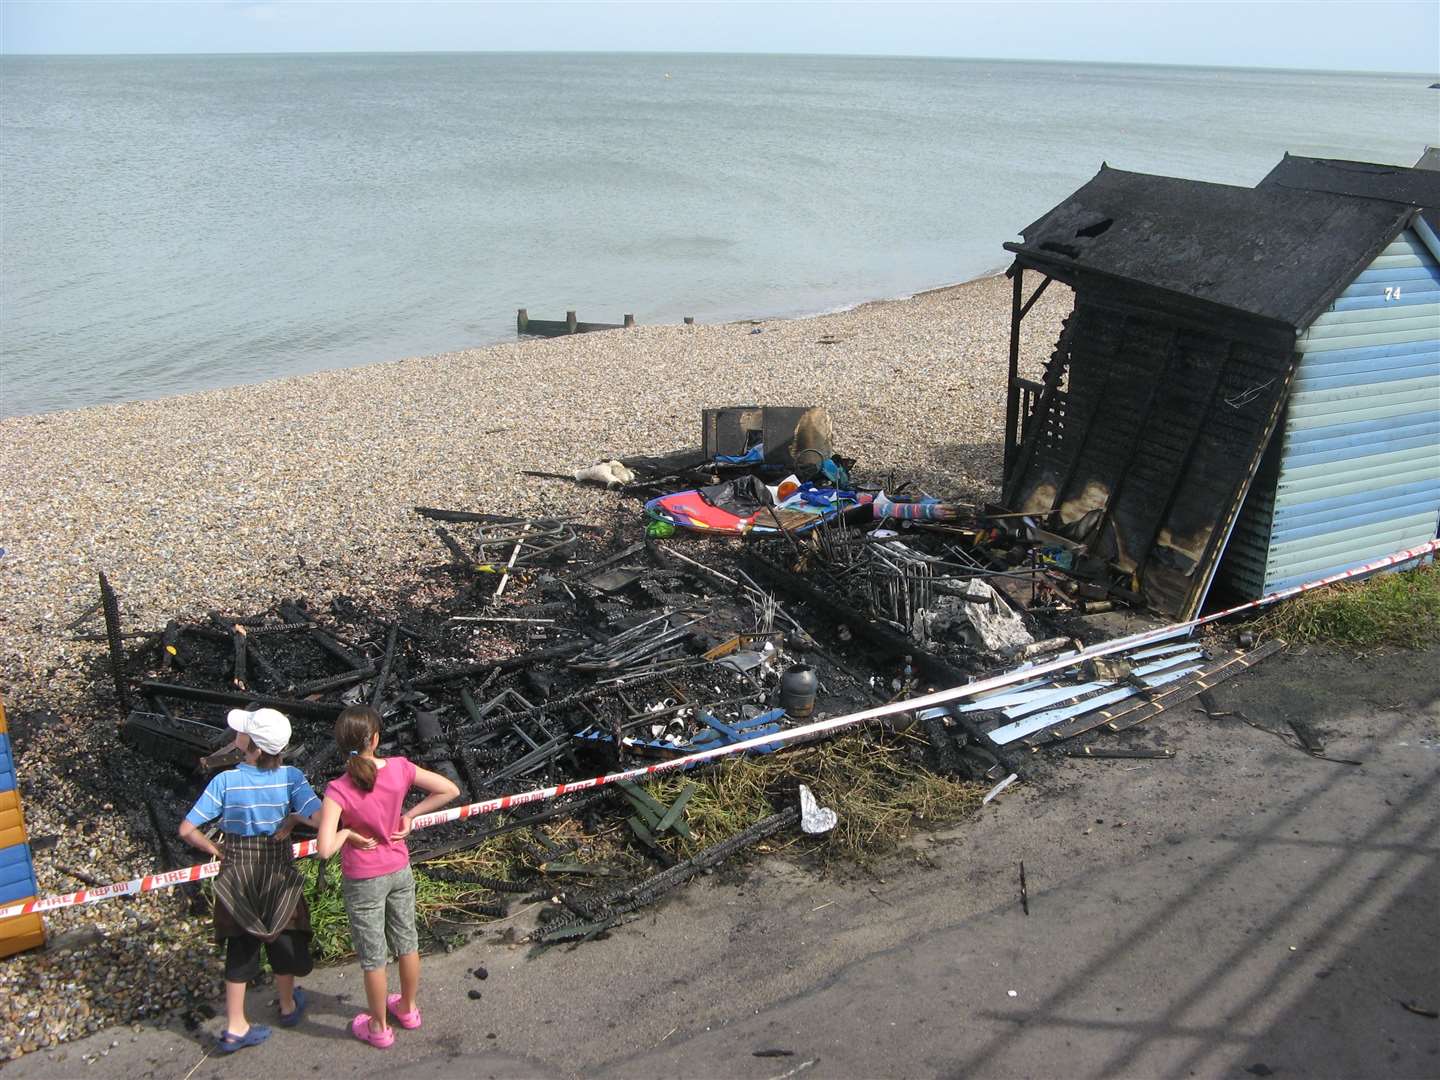 The charred remains of the Herne Bay beach huts that burnt down 13 years ago